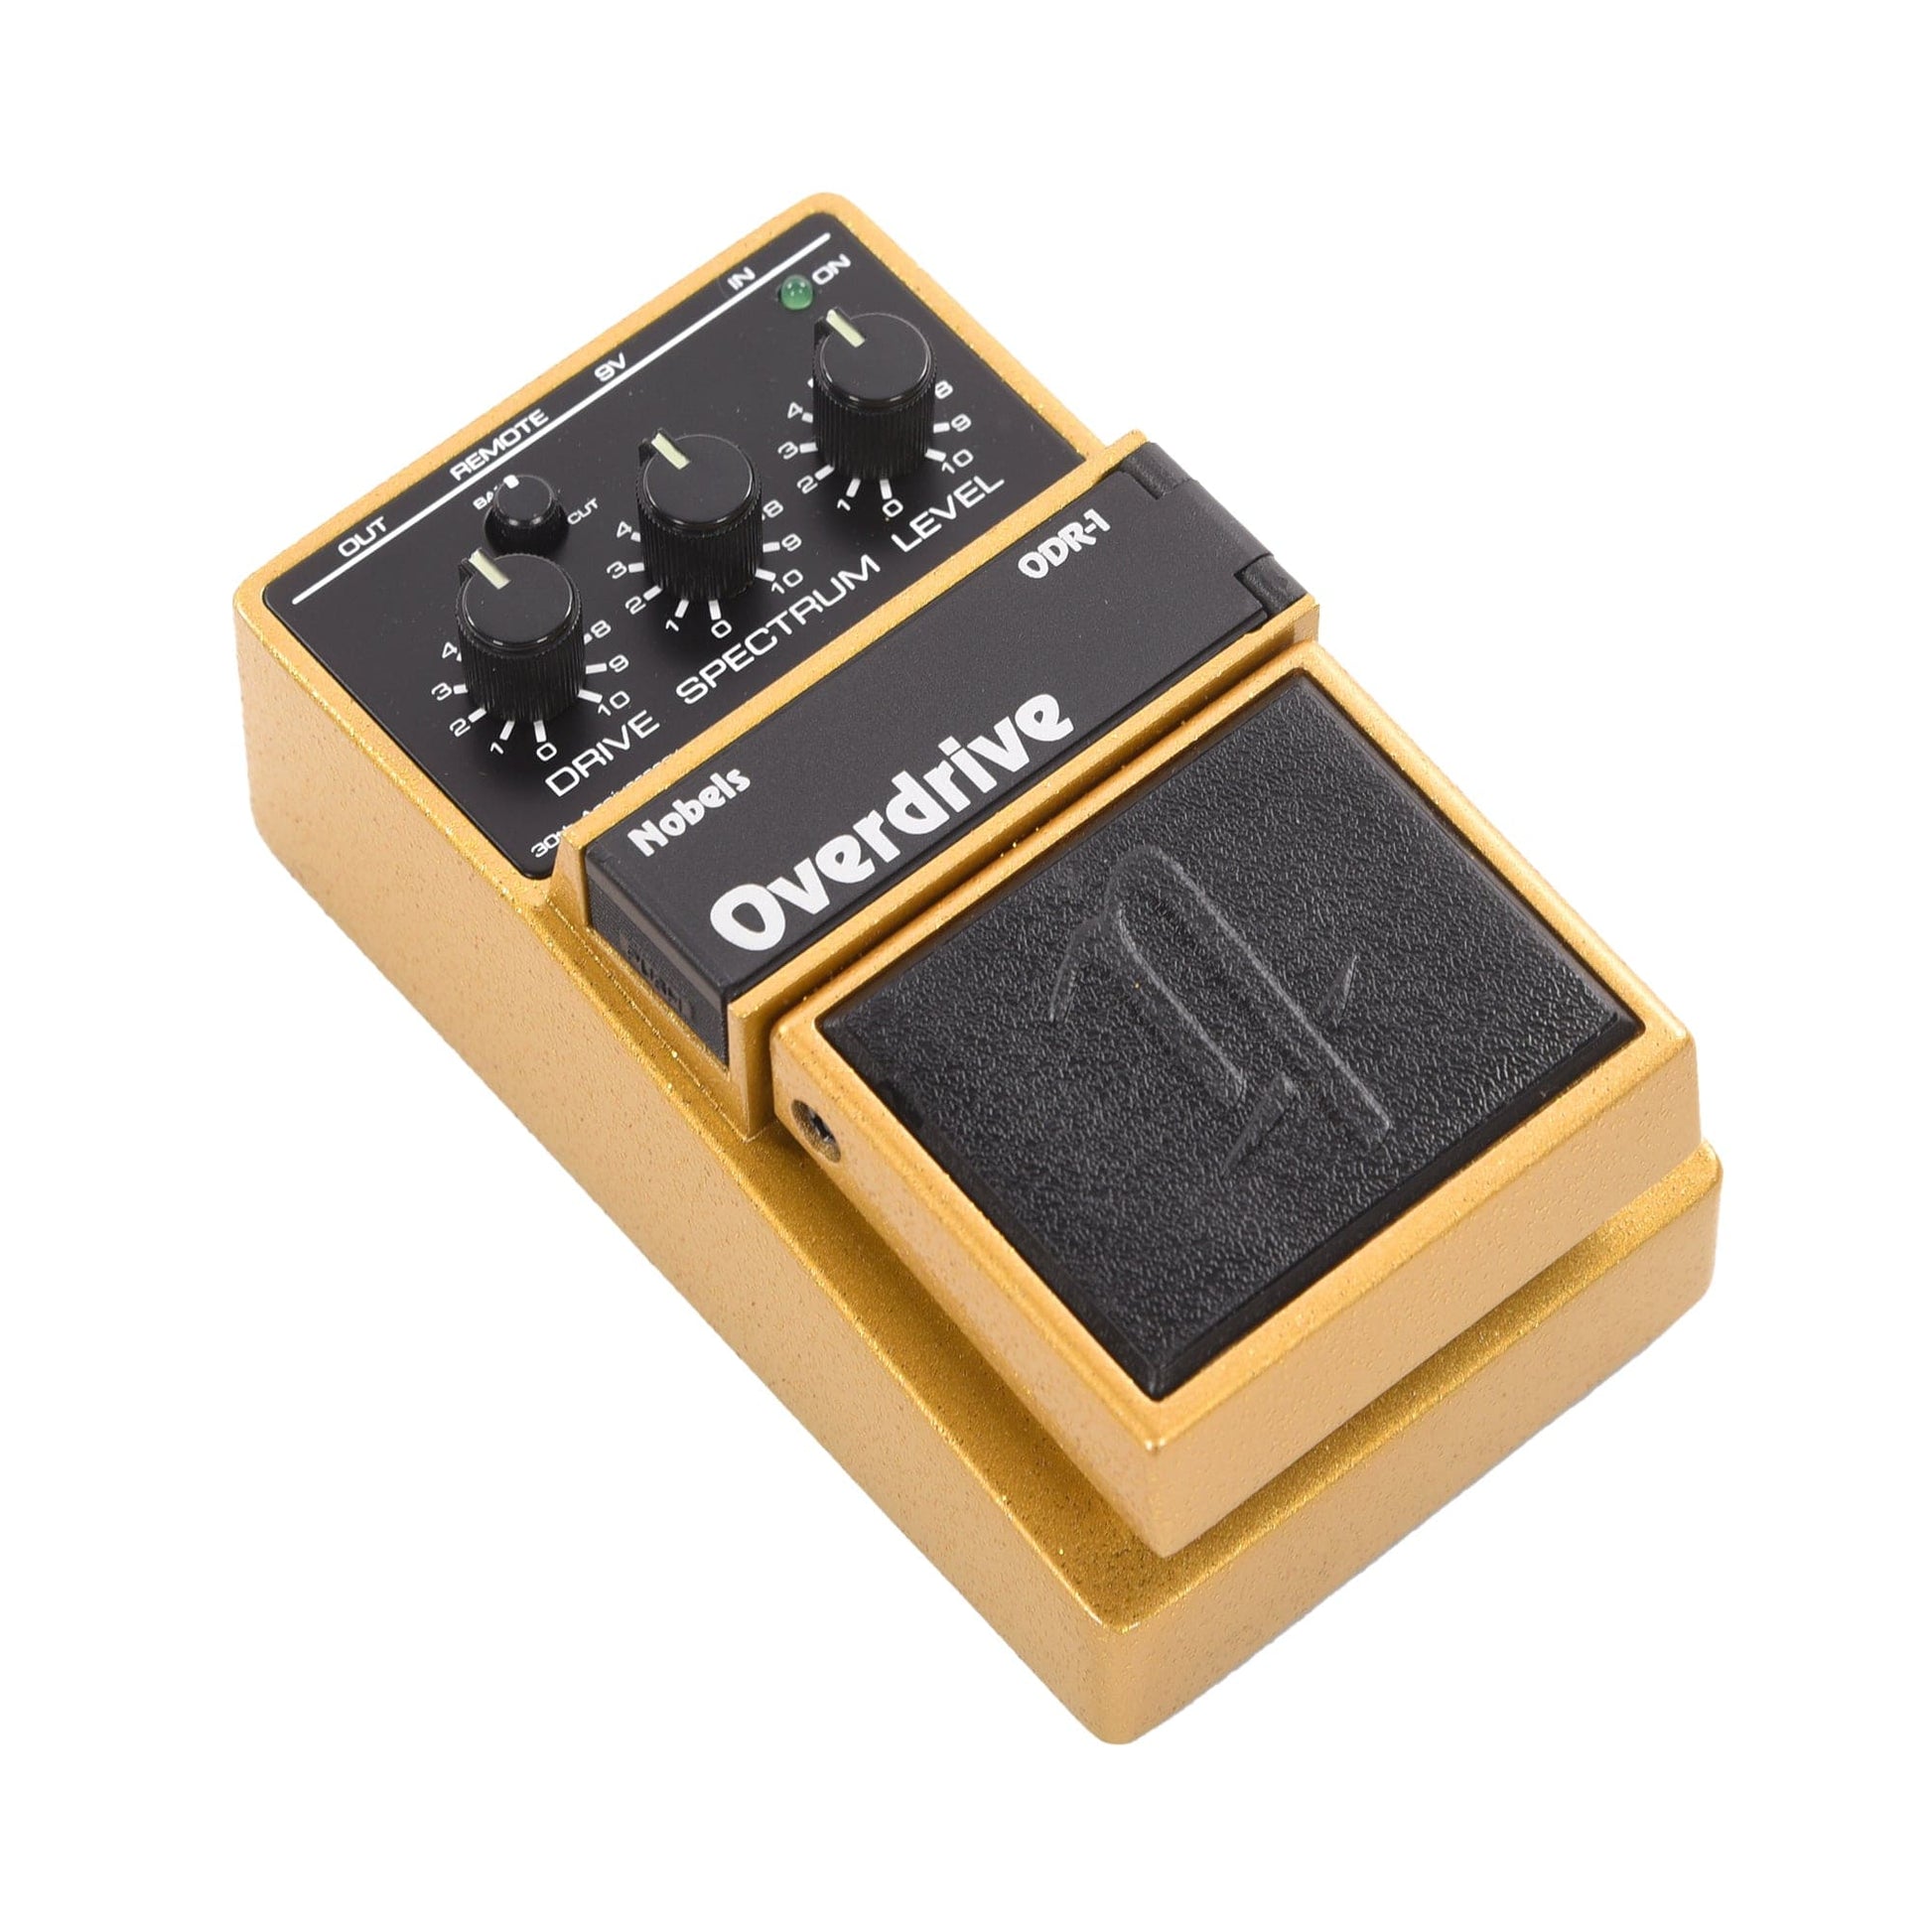 Nobels 30th Anniversary Edition ODR-1 Overdrive Metallic Gold Effects and Pedals / Overdrive and Boost